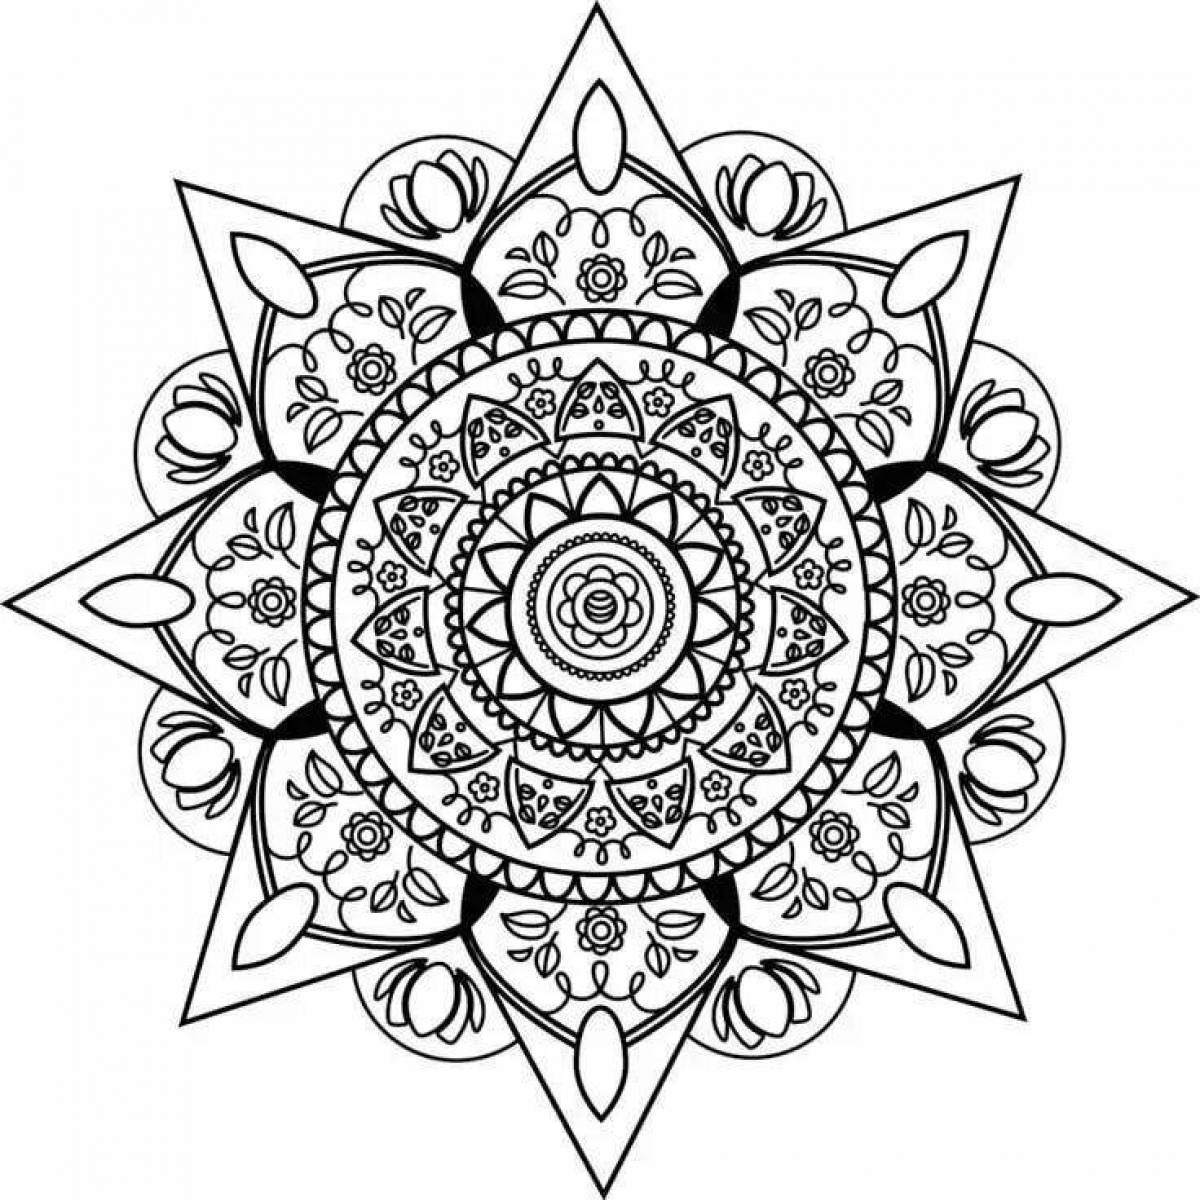 Glowing health and wellness mandala coloring page